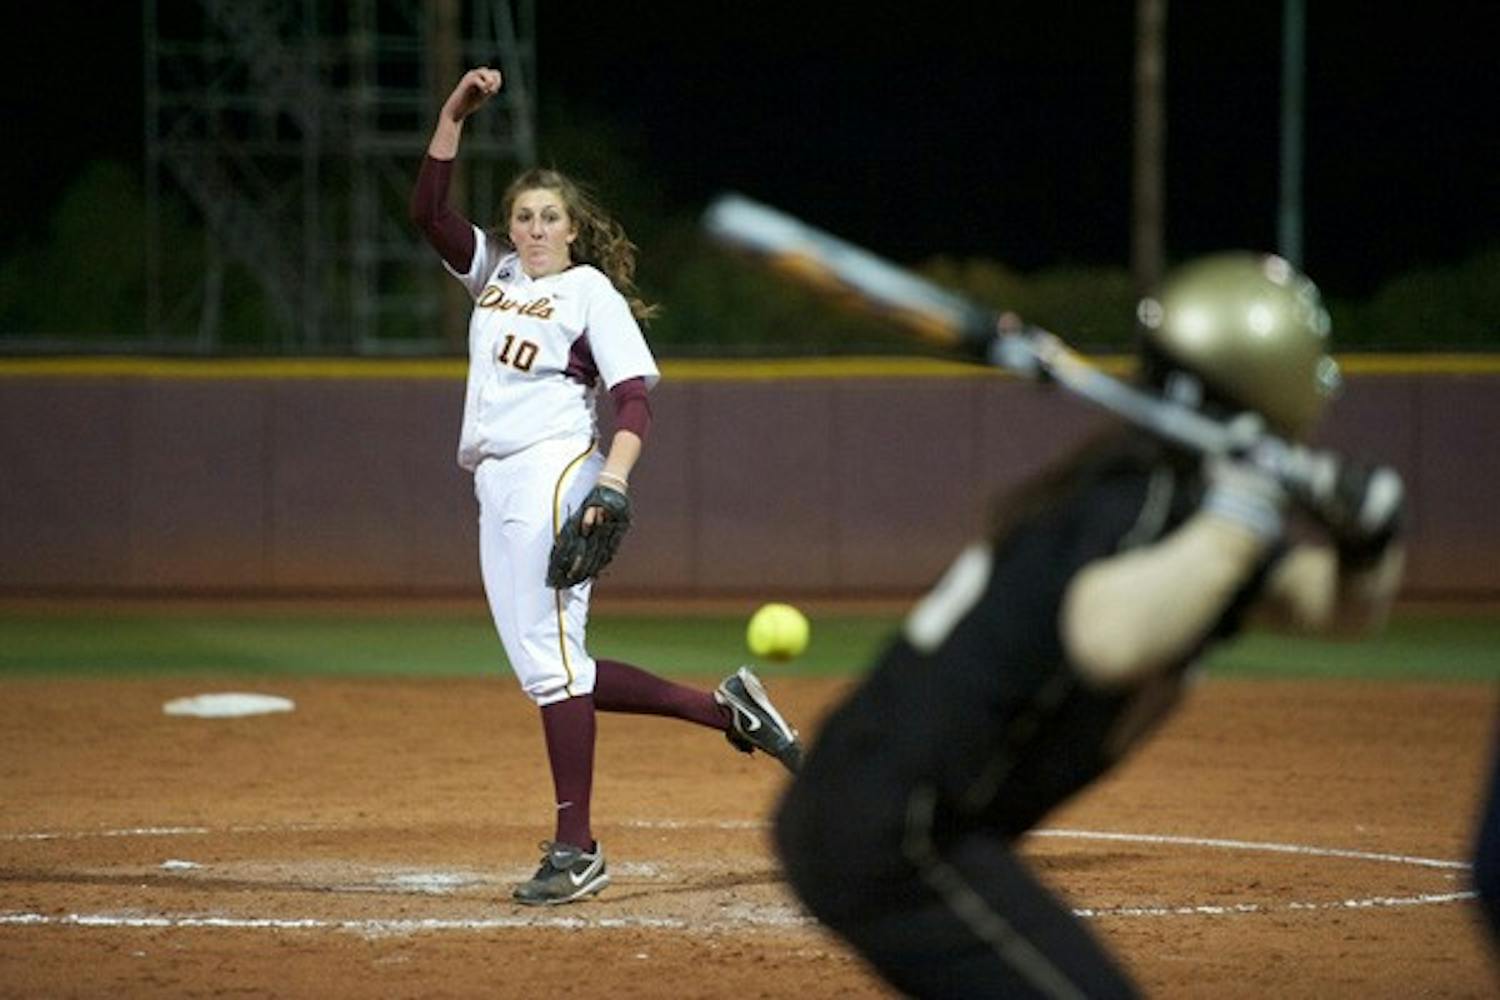 Underway: ASU junior pitcher Hillary Bach unloads a pitch against Western Michigan Thursday night. Bach pitched a scoreless inning in a 17-0 rout of the Mustangs. (Photo by Michael Arellano)